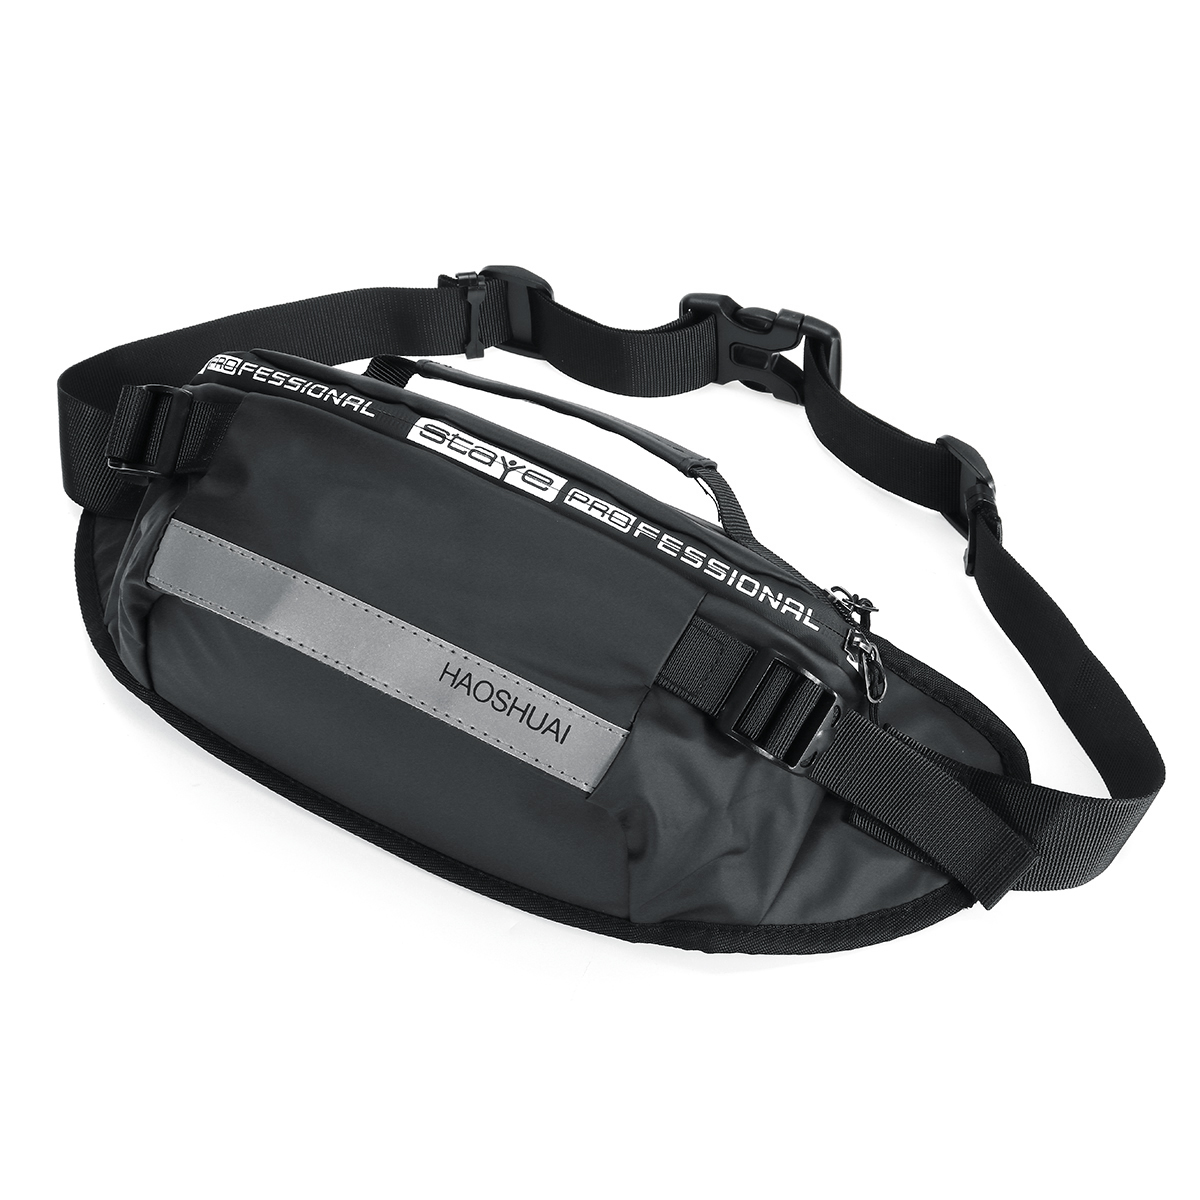 Unisex Outdoor Sports Waist Bag Mobile Phone Storage Bag with Reflective Strip 